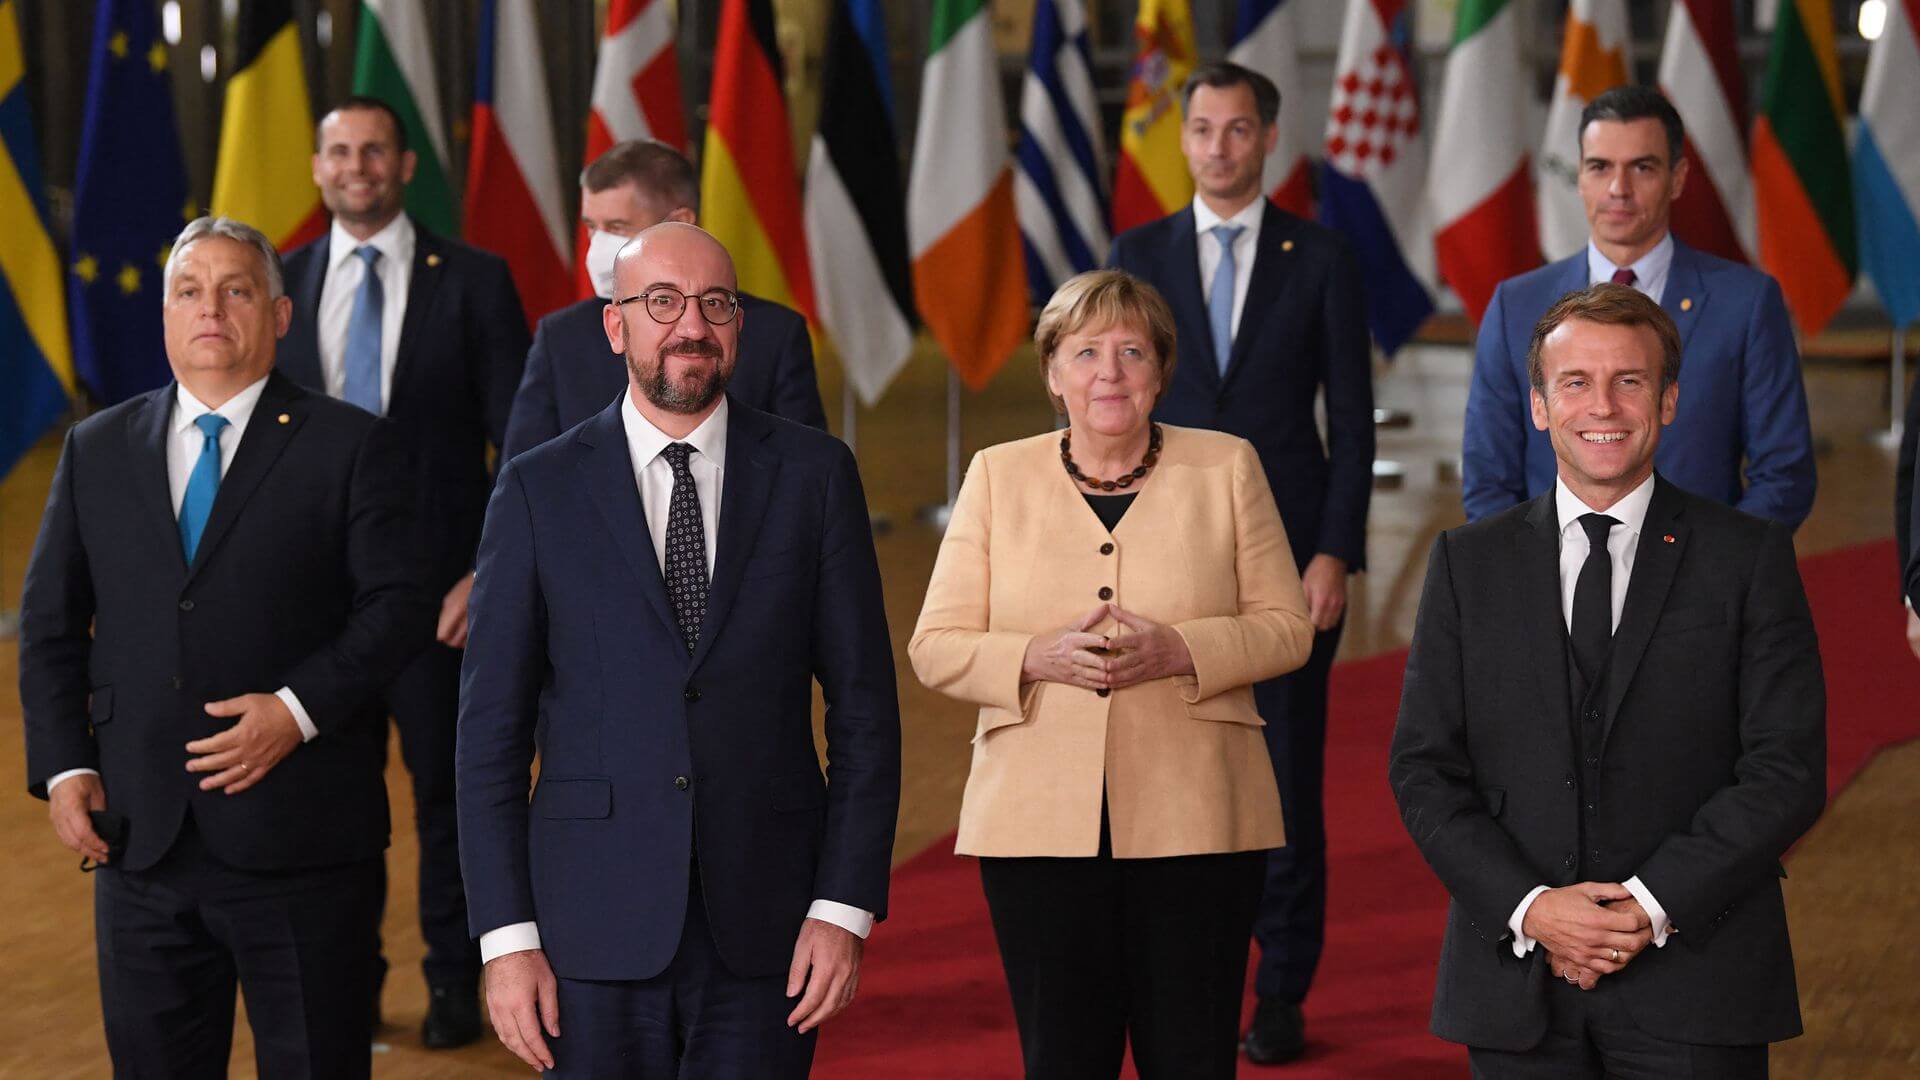 EU Leaders Pay Tribute to Germany’s Merkel, Discuss Poland, Energy Crisis at Summit